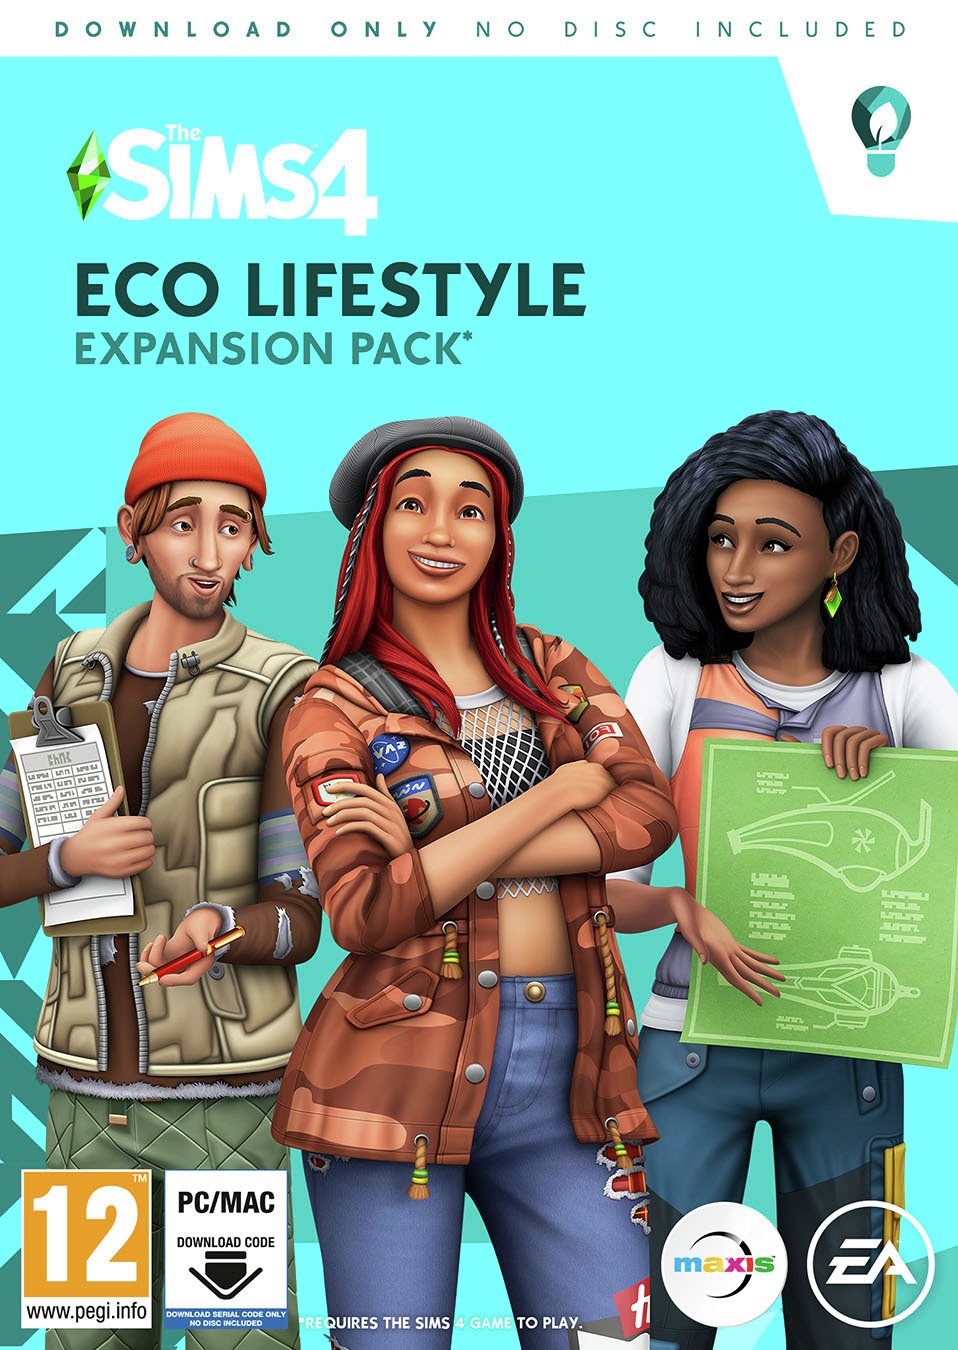 The Sims 4: Eco Lifestyle PC Game Expansion Review